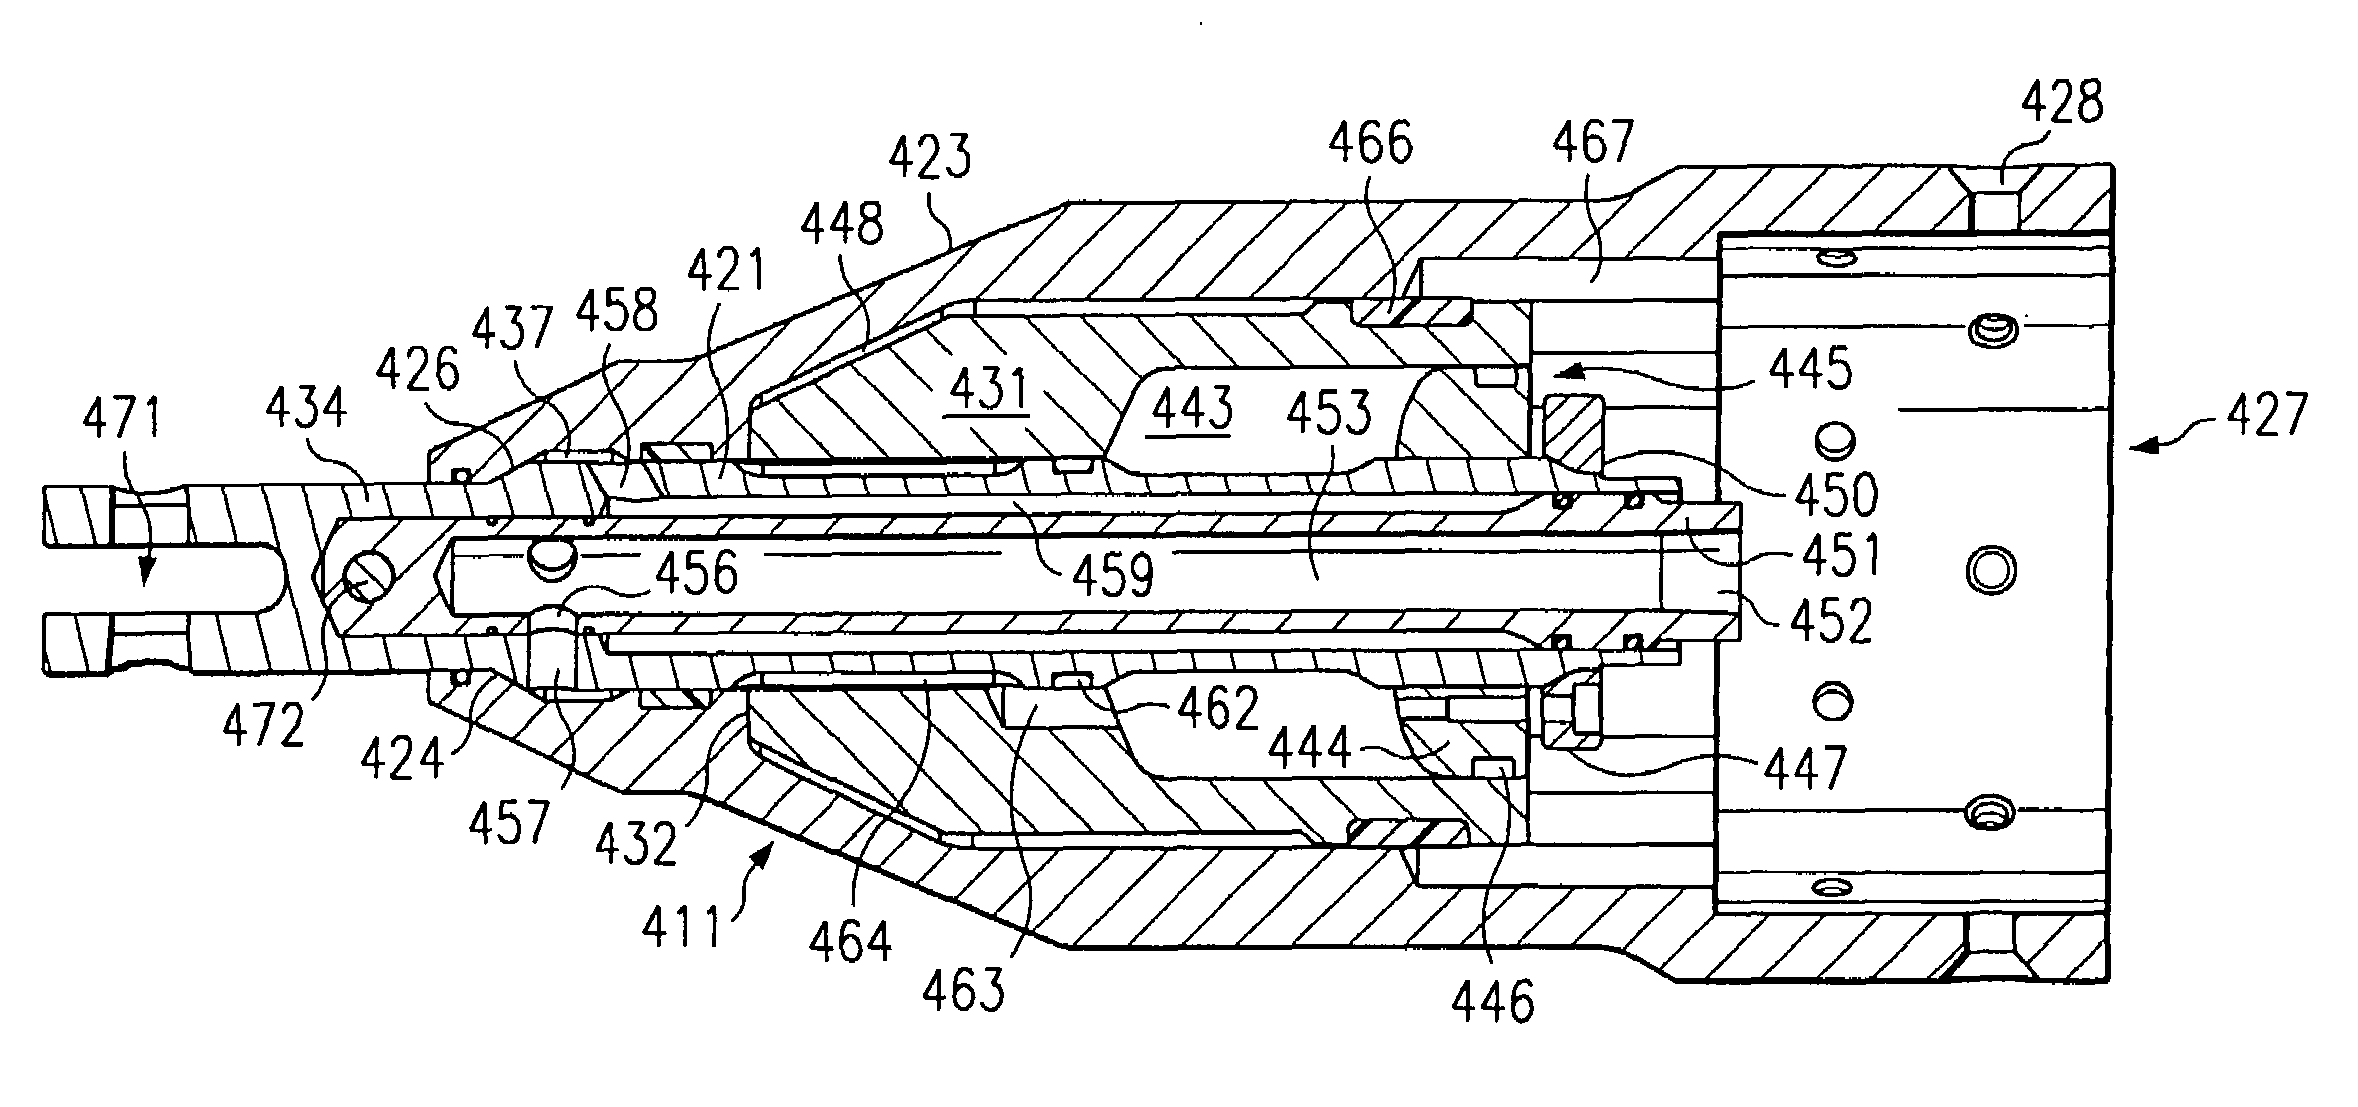 Method and apparatus for replacement of underground pipe